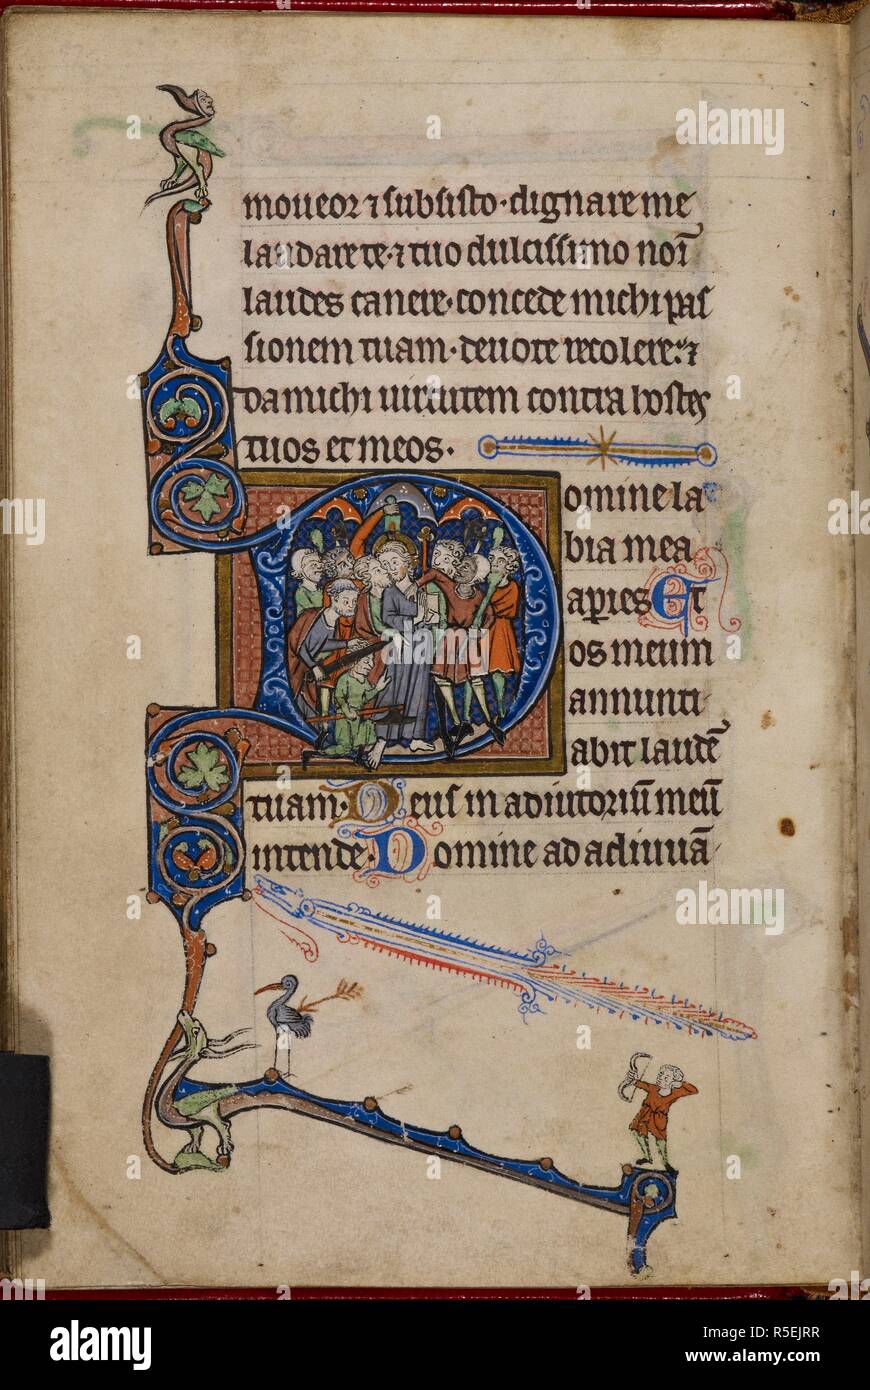 Historiated initial 'D'(omine) of the Betrayal of Christ, at the beginning of Matins in the Office of the Passion. Judas kisses Jesus, who holds a staff and book and is surrounded by soldiers holding clubs and axes. To the left, Peter cuts the ear of a crouching soldier with a large sword. In the lower bar border, is a dragon and a man shooting an arrow at a bird. Book of Hours. England, S. or Central (Oxford or West Midlands?); 3rd quarter of the 13th century. Source: Egerton 1151, f.95v. Language: Latin, some rubrics in French. Stock Photo